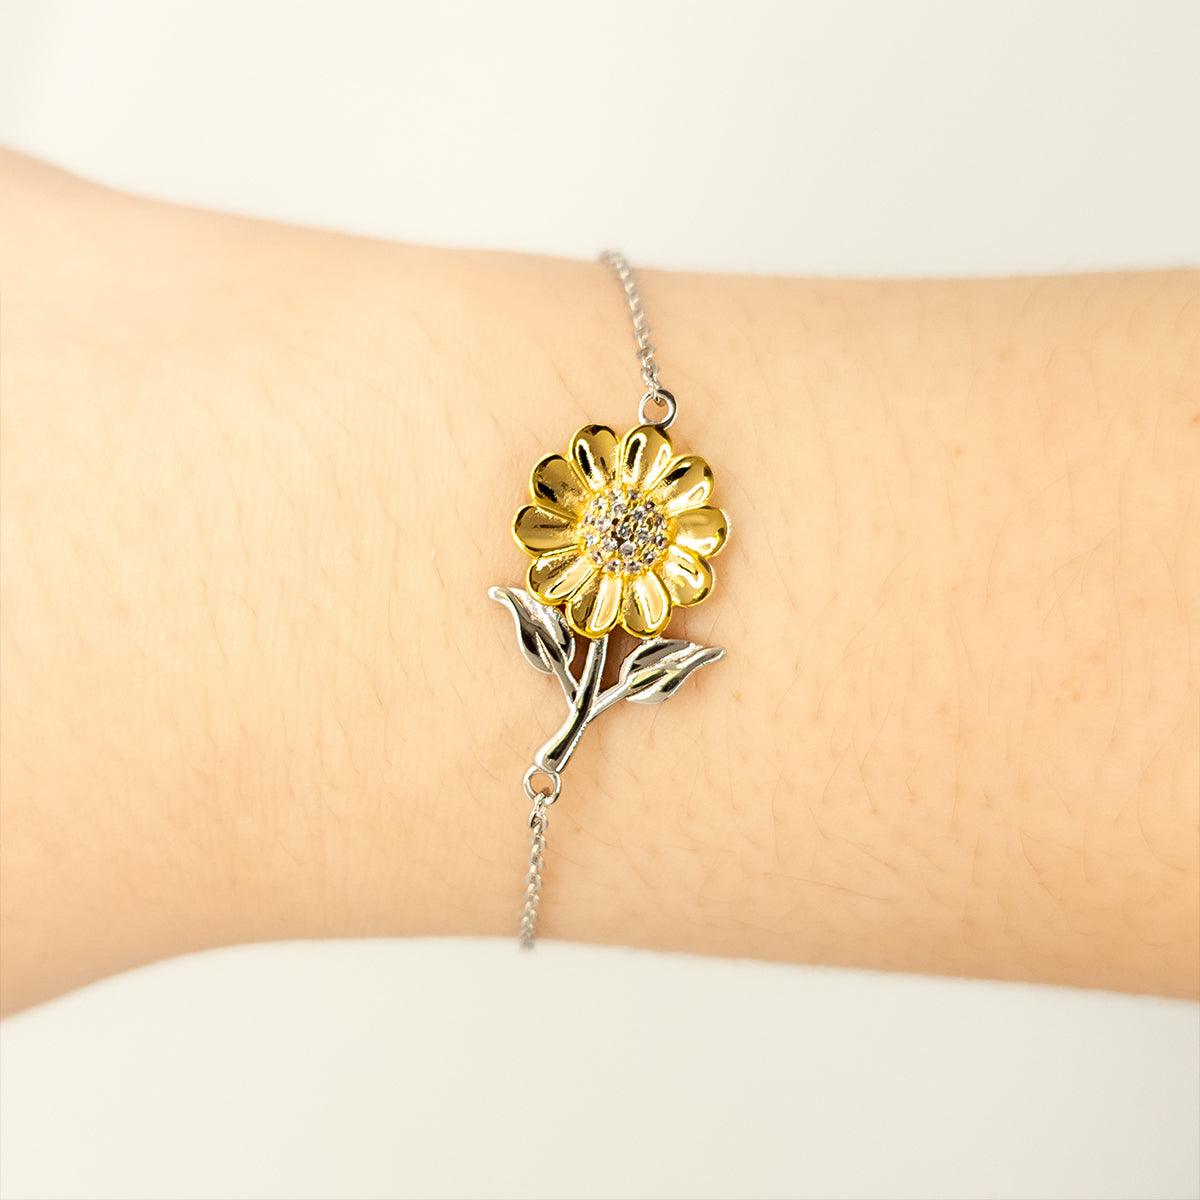 Financial Advisor Sunflower Bracelet - Thanks for being who you are - Birthday Christmas Jewelry Gifts Coworkers Colleague Boss - Mallard Moon Gift Shop